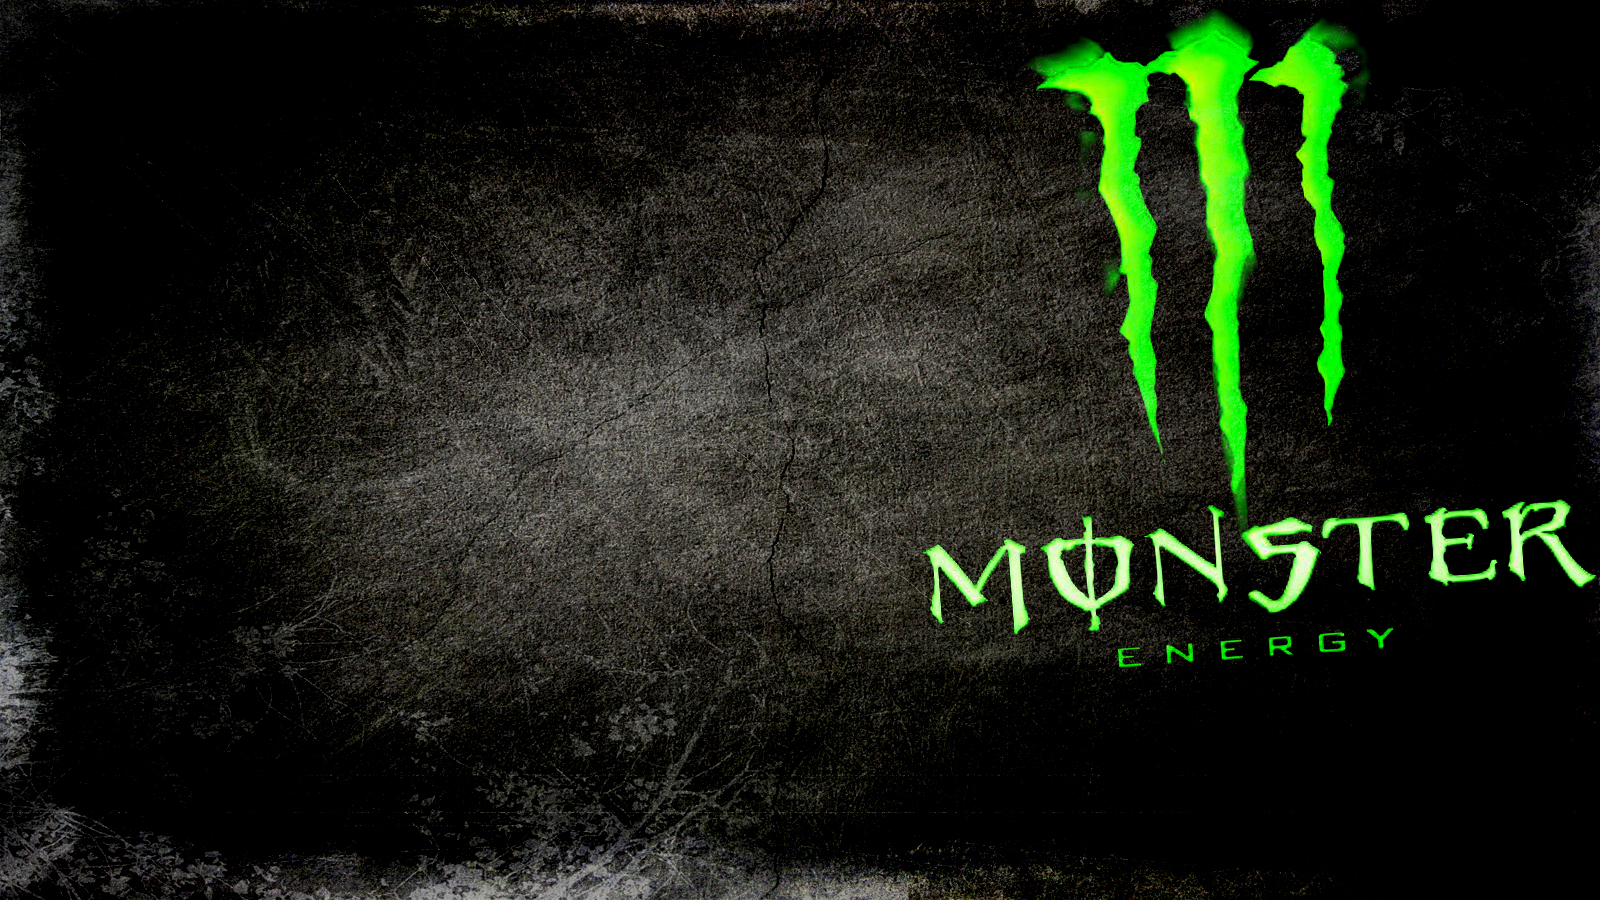 Image Monster Energy Dc Wallpaper Desktop Pc Android iPhone